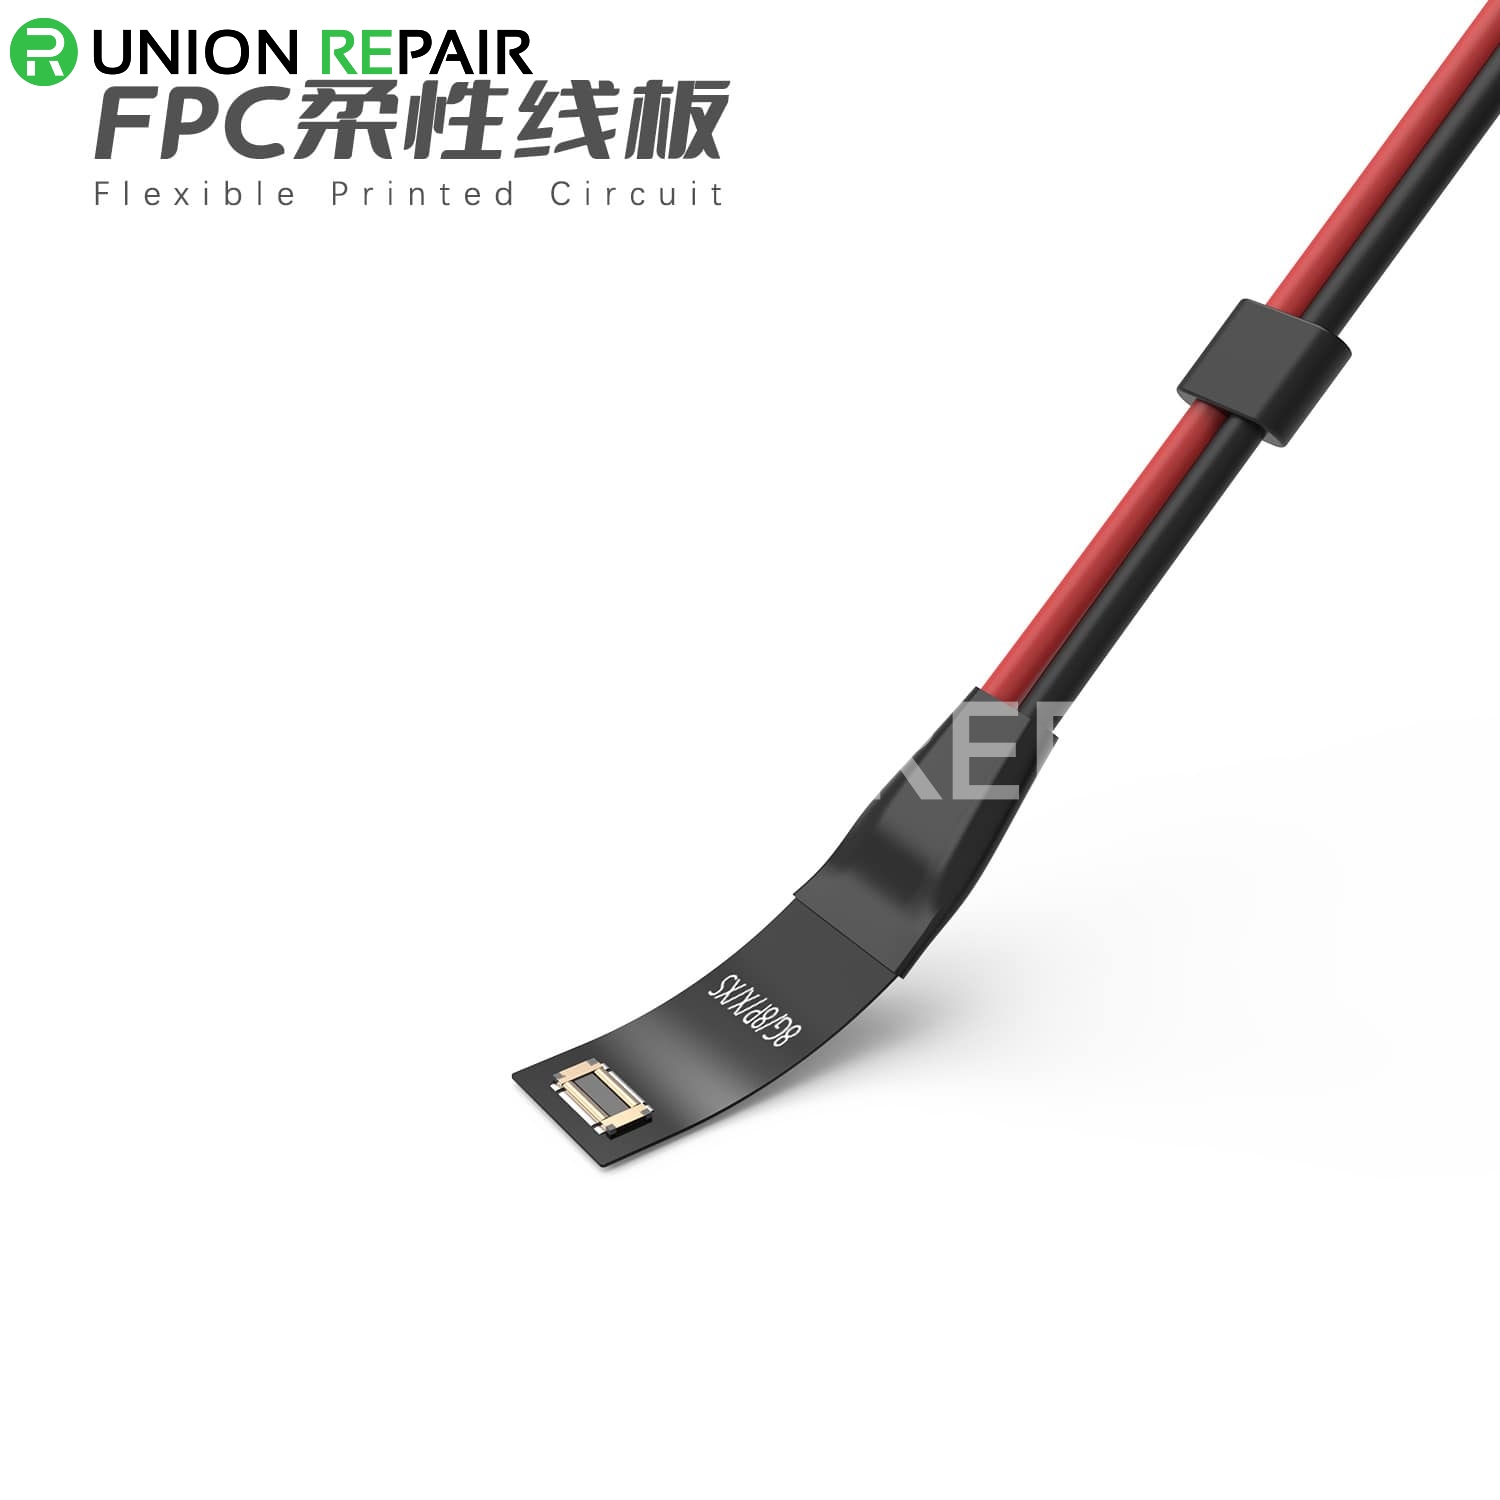 2UUL x 18 Kinds Ultra Soft Power Line for iPhone 6- 13 Pro Max